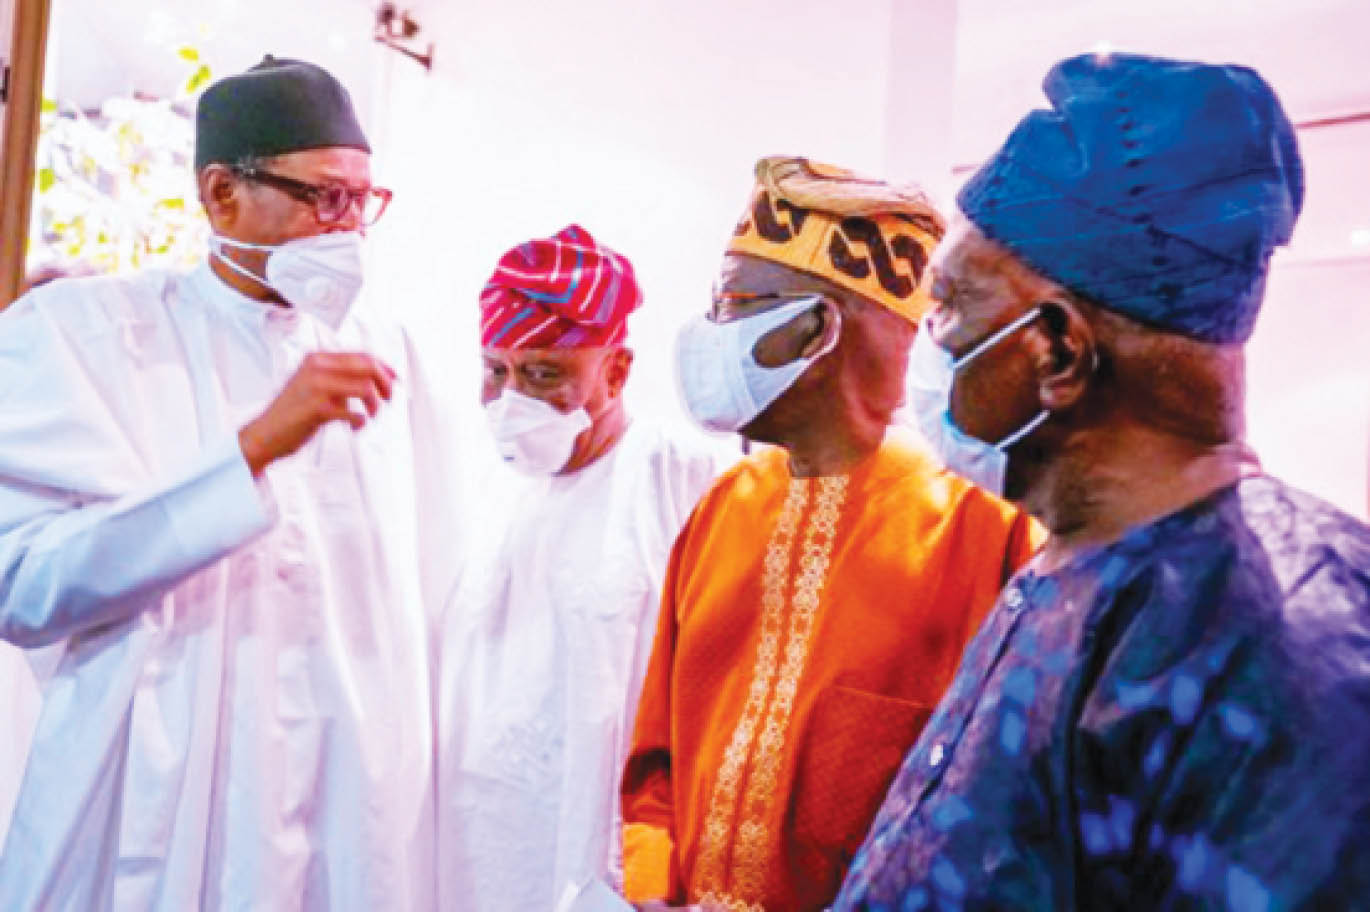 President Buhari discussing with Tinubu and some of his allies during their last visit to Aso Rock